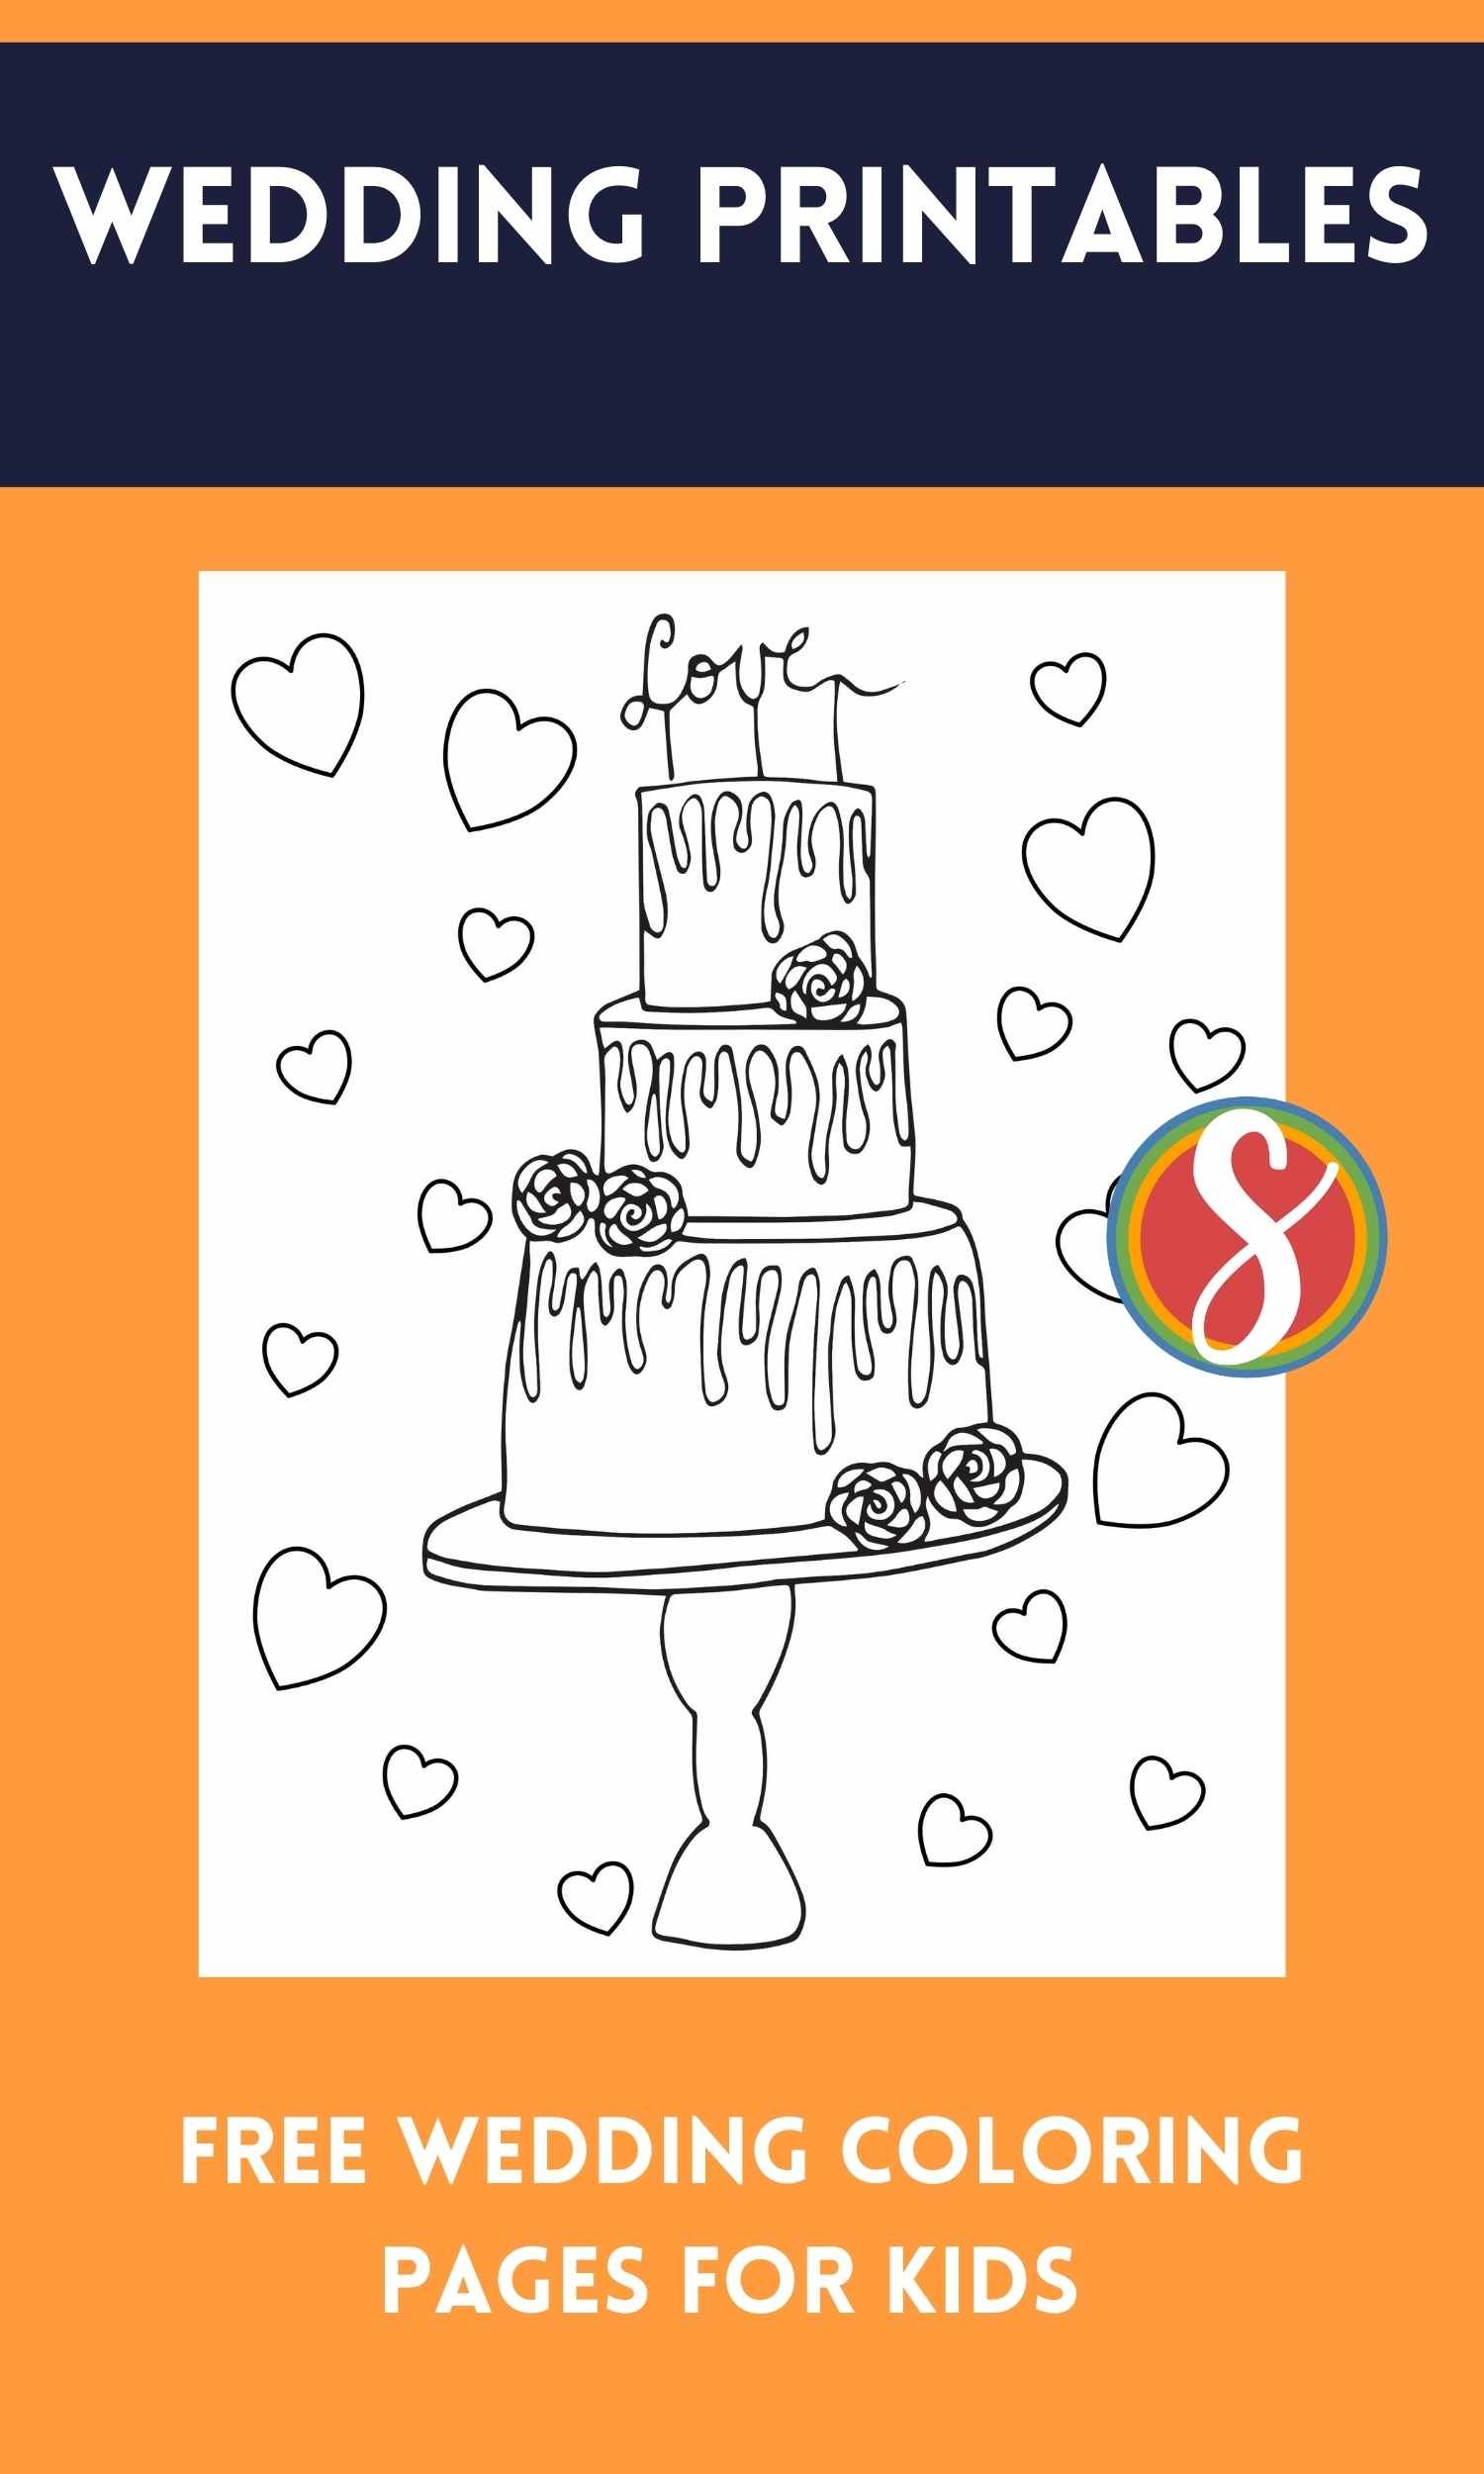 Free Printable Wedding Coloring Pages for Kids and Adults